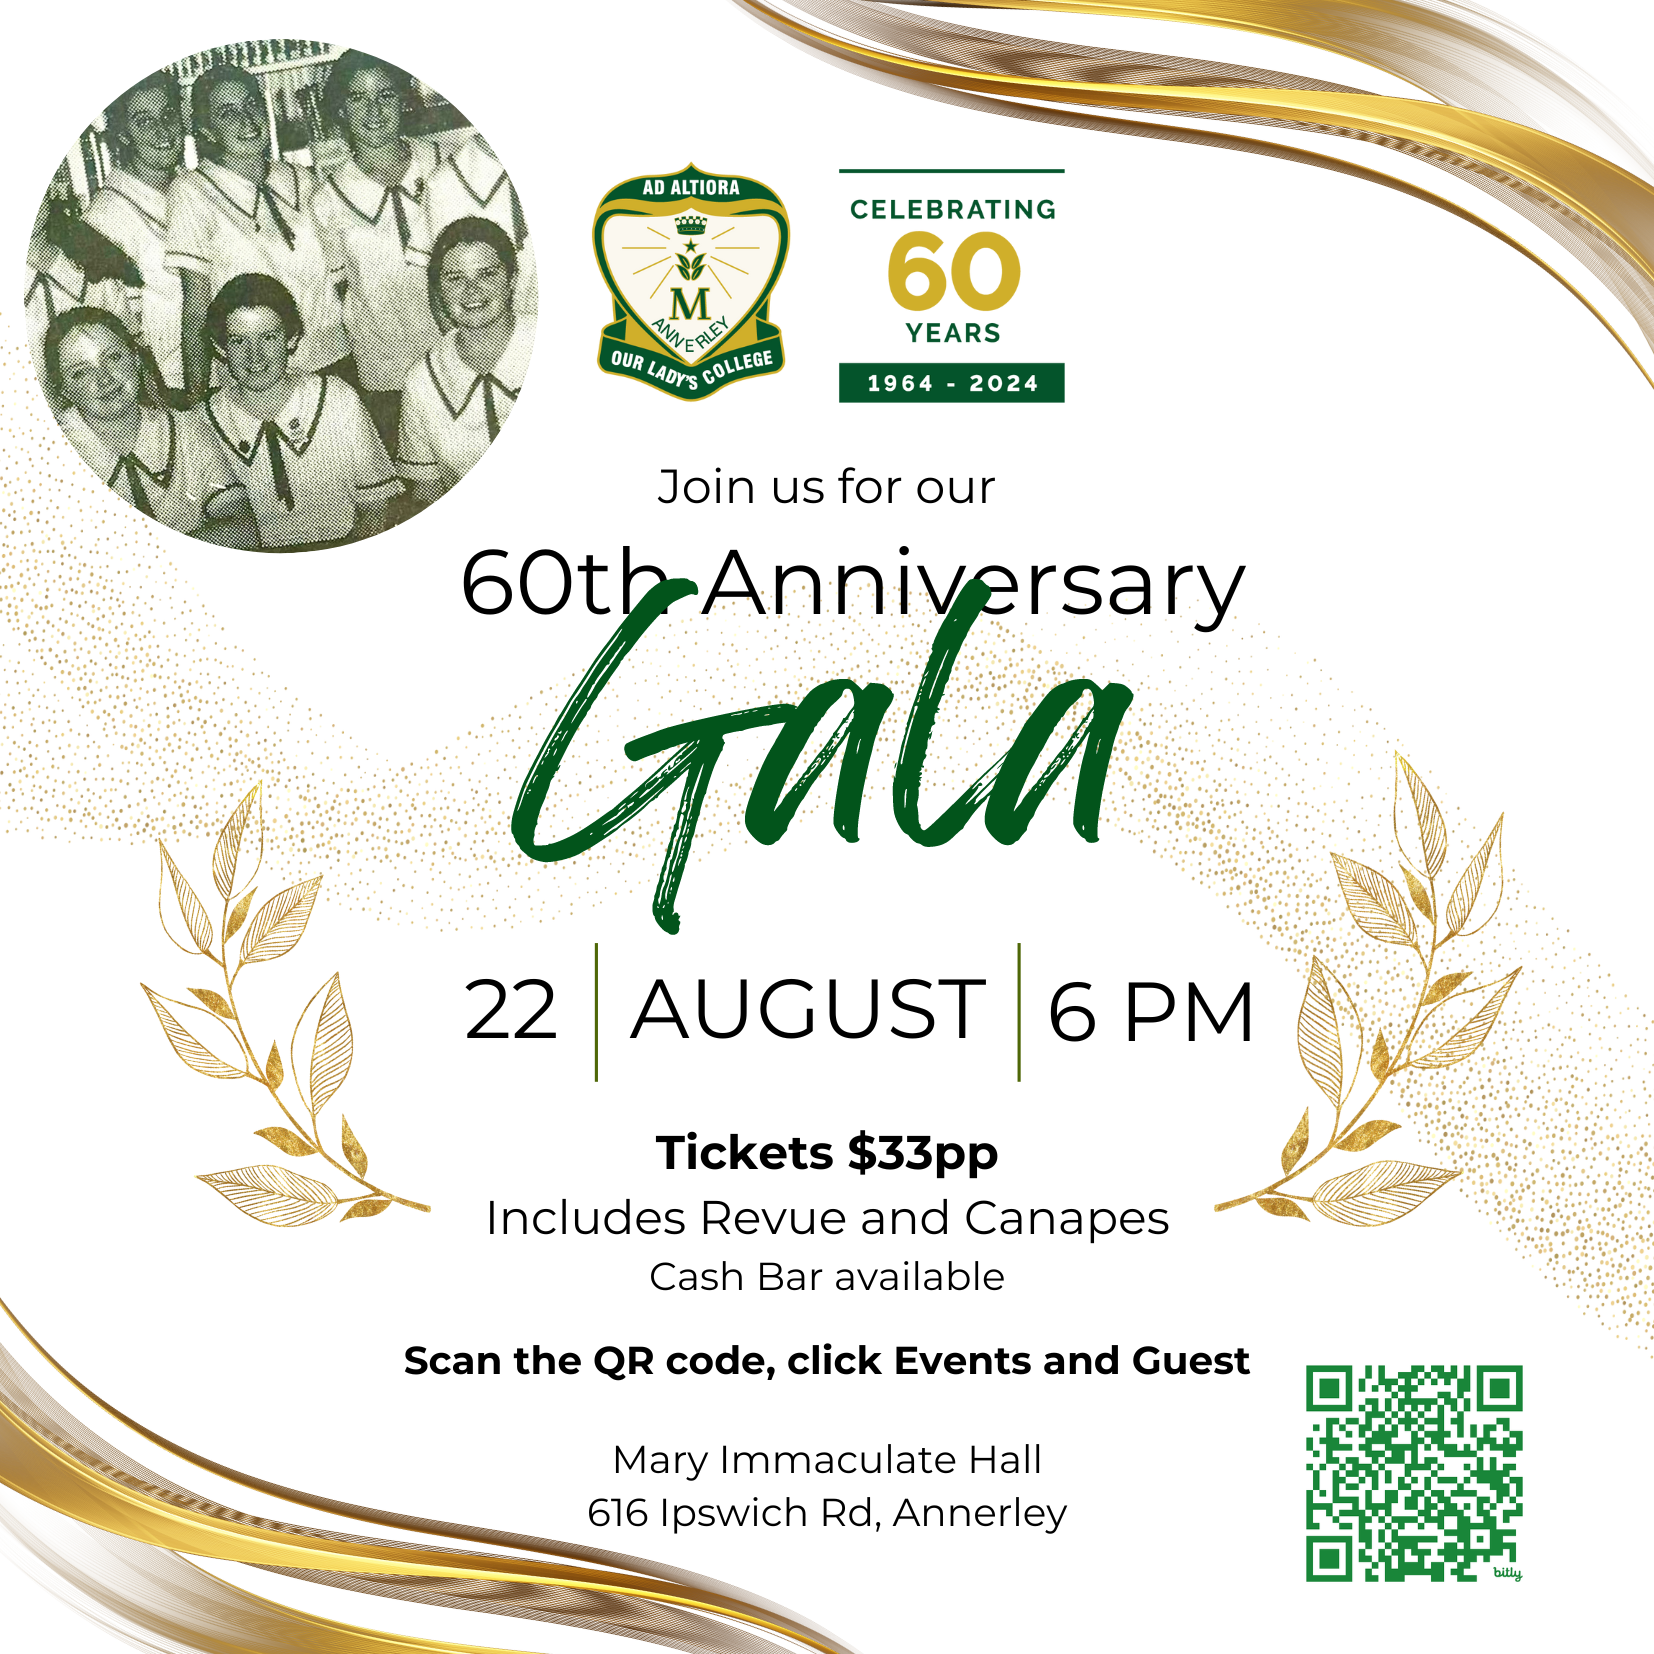 Copy of OLC 60th Anniversary Gala_Tickets Promo.pdf (Instagram Post).png